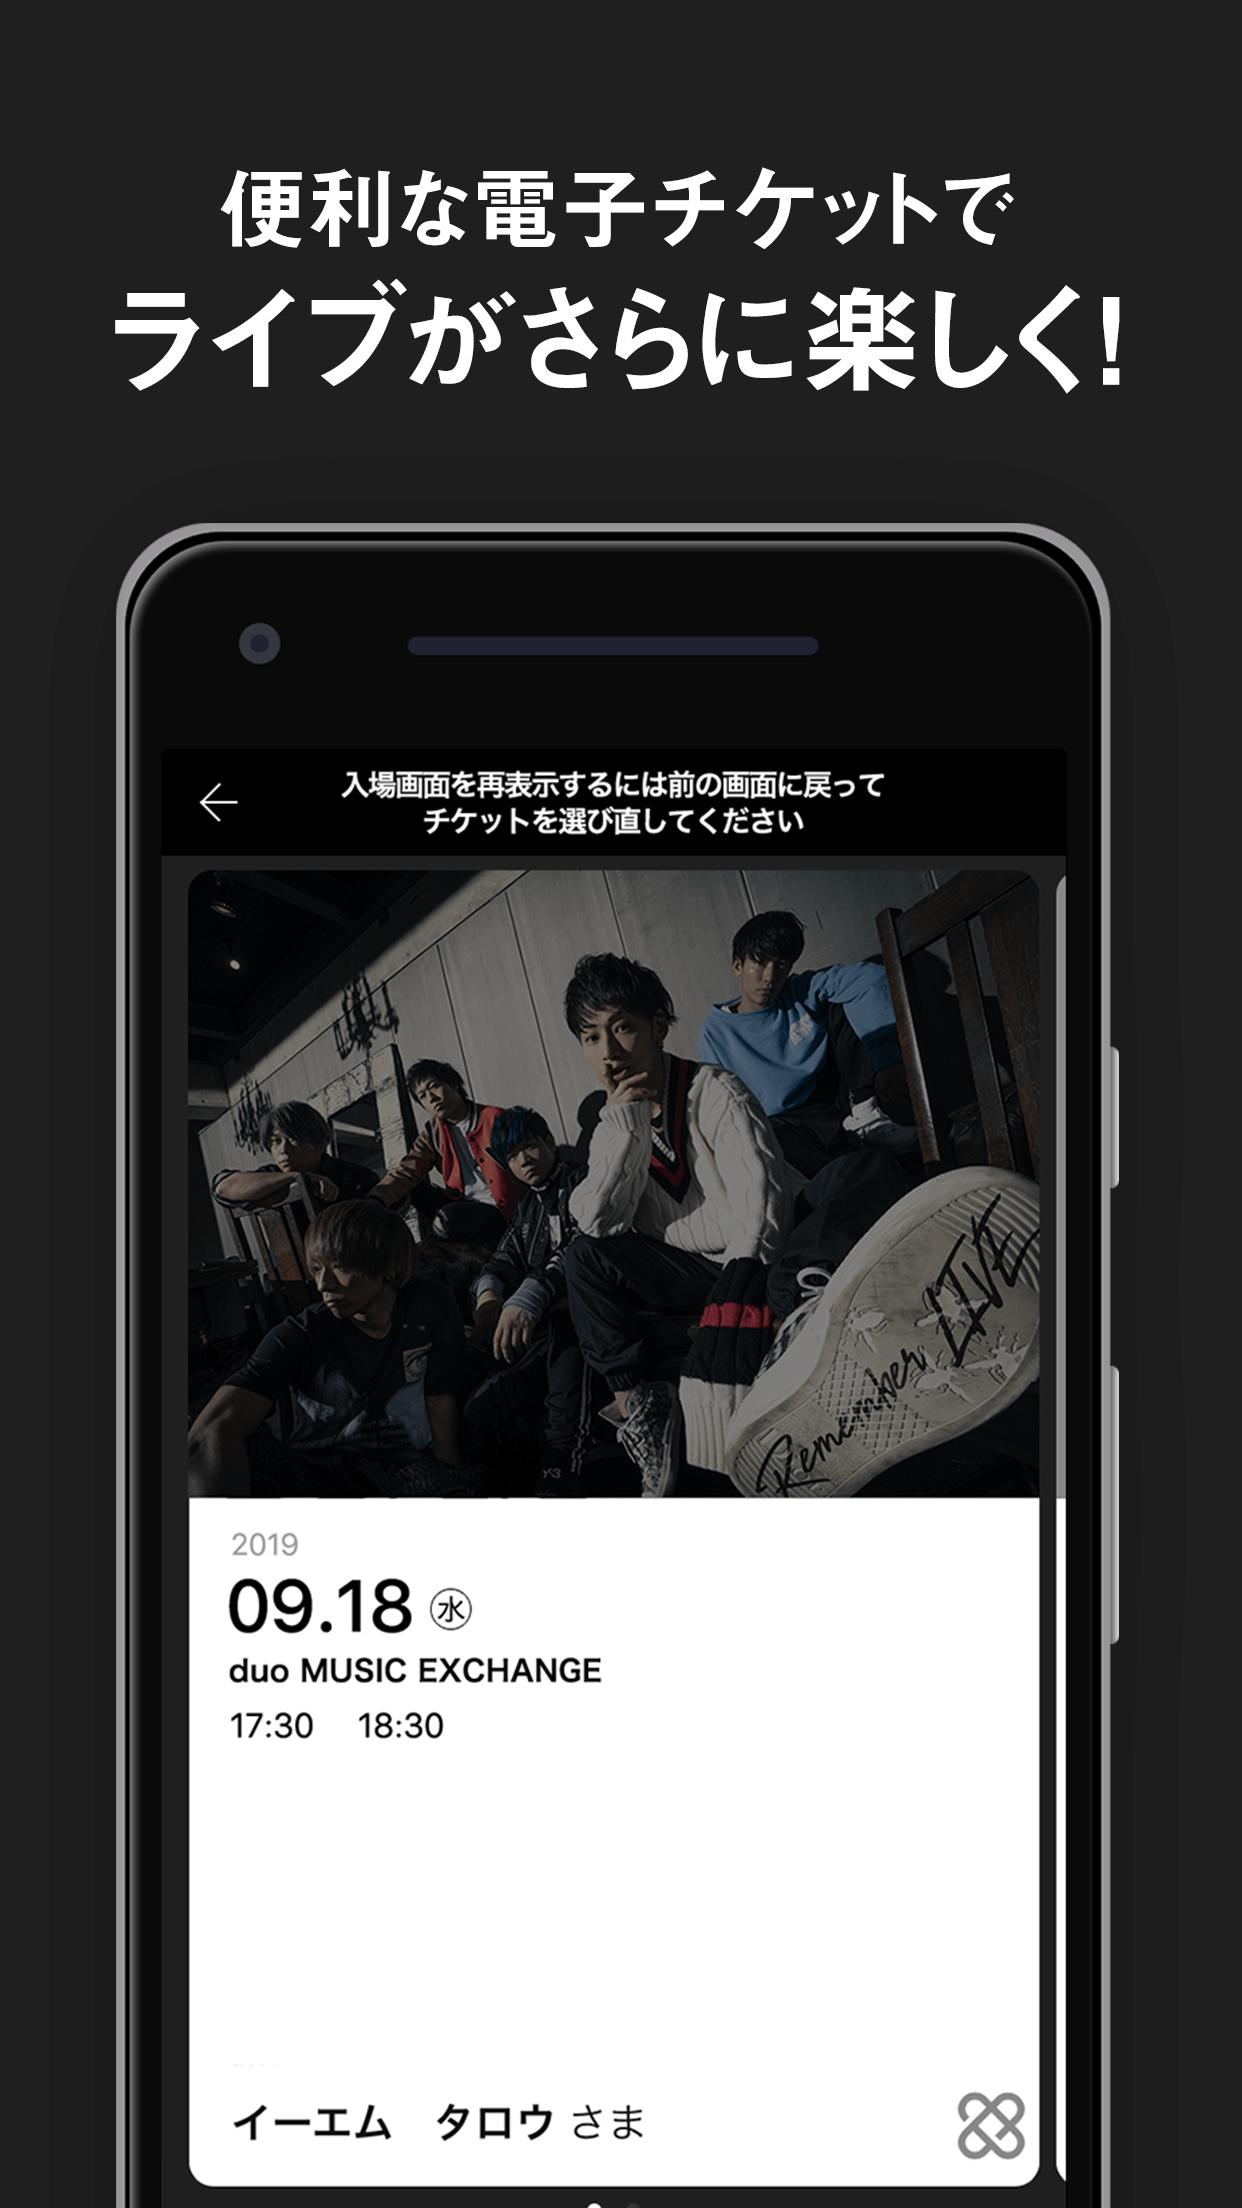 Uverworld Official App For Android Apk Download